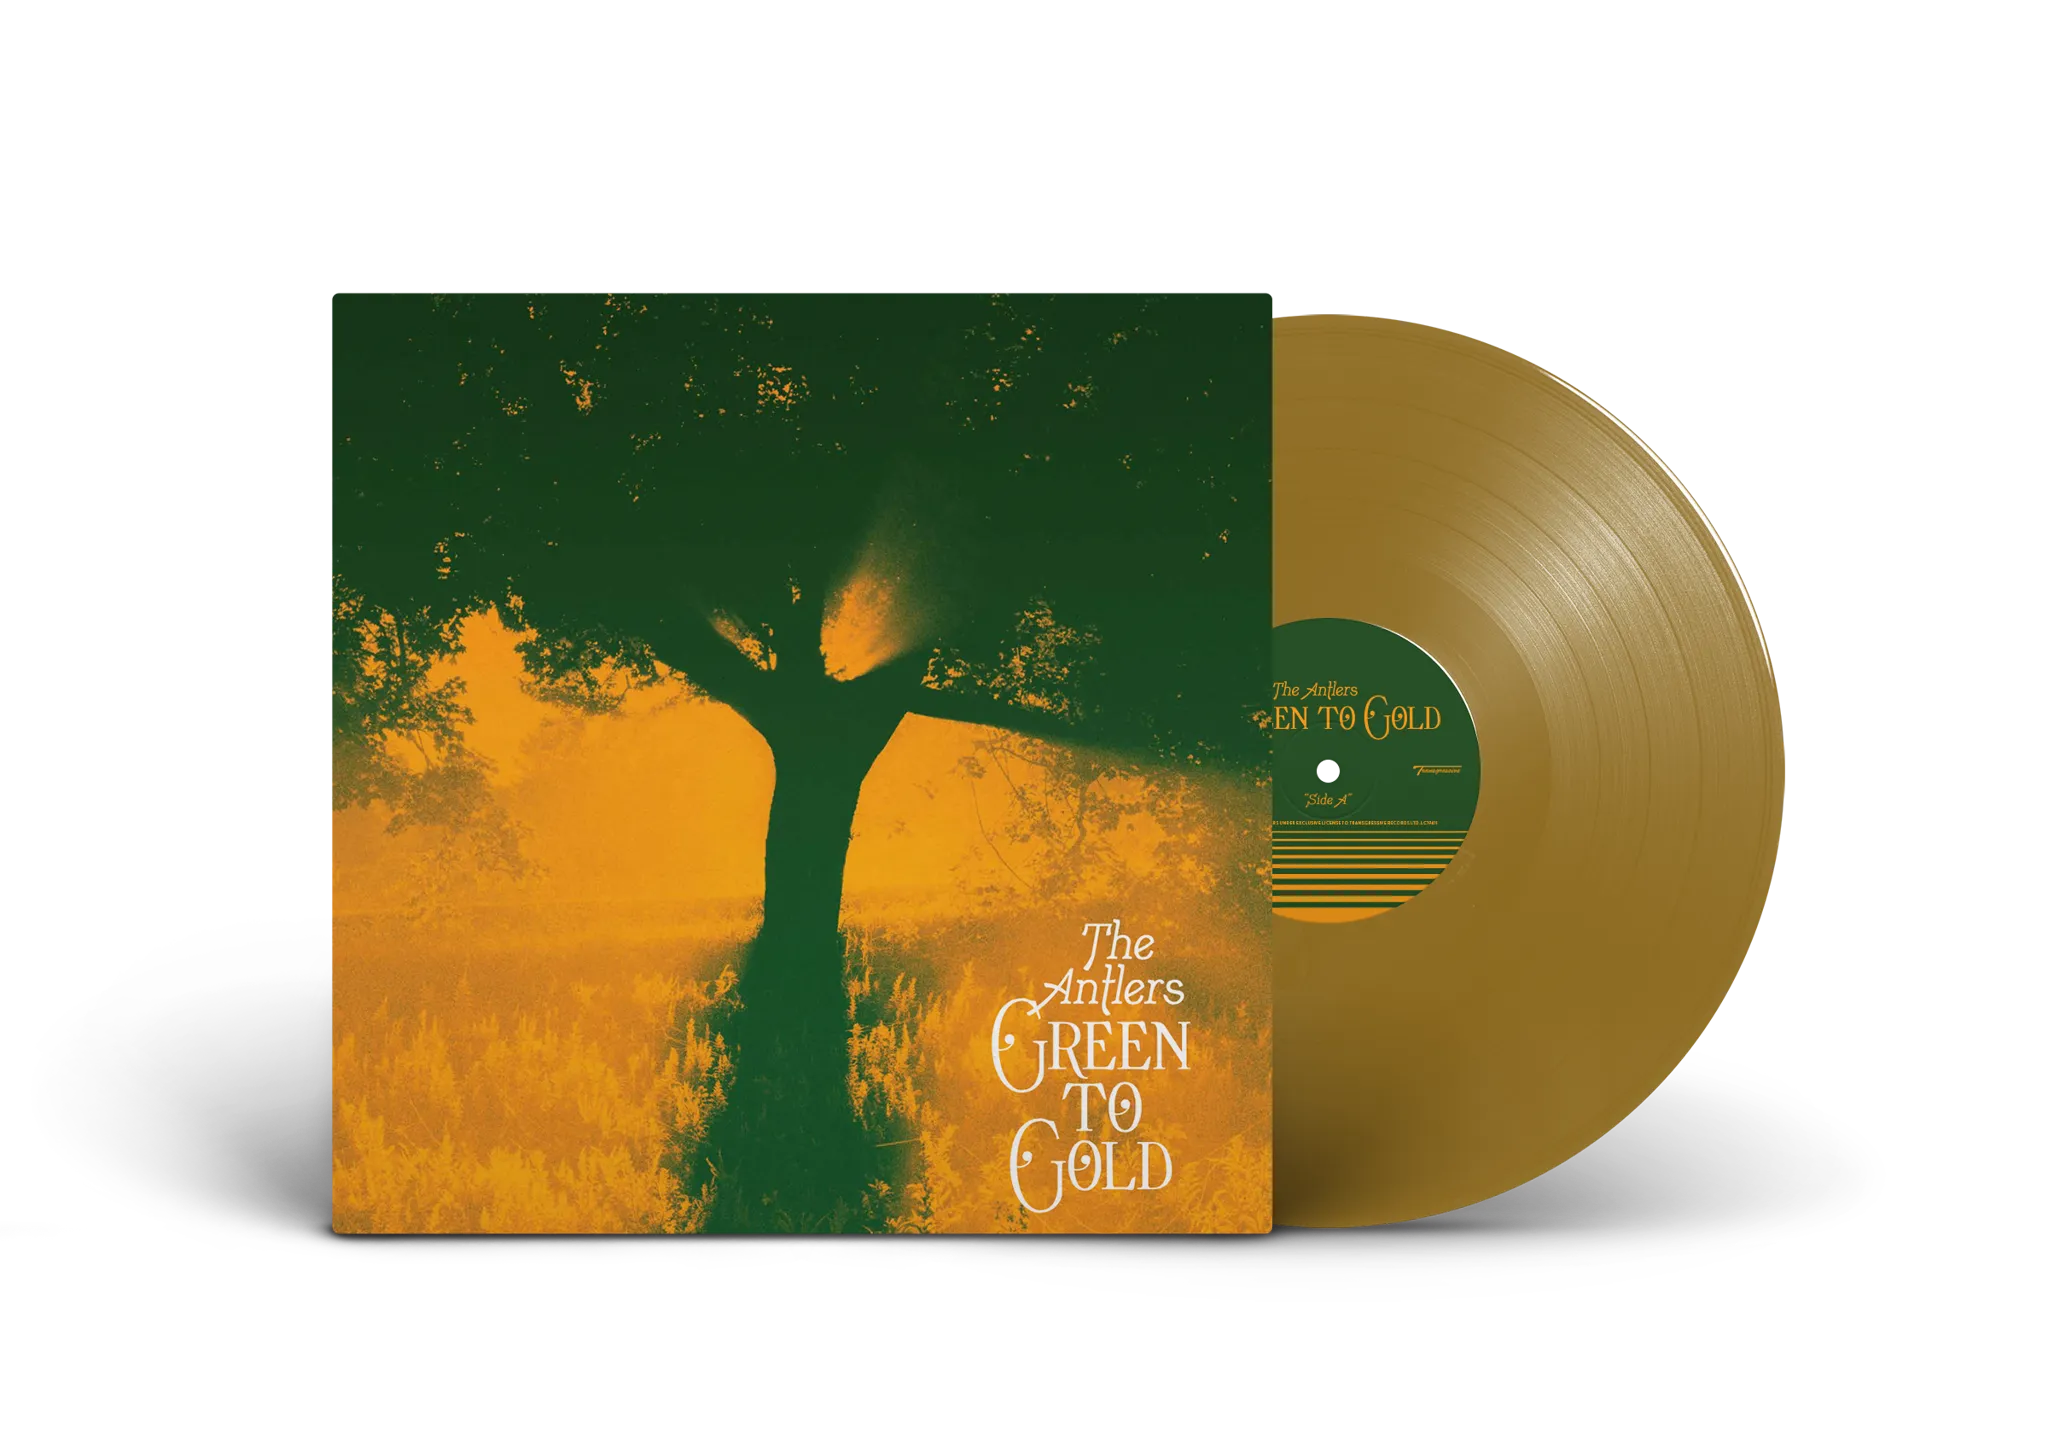 <strong>The Antlers - Green To Gold</strong> (Vinyl LP - gold)